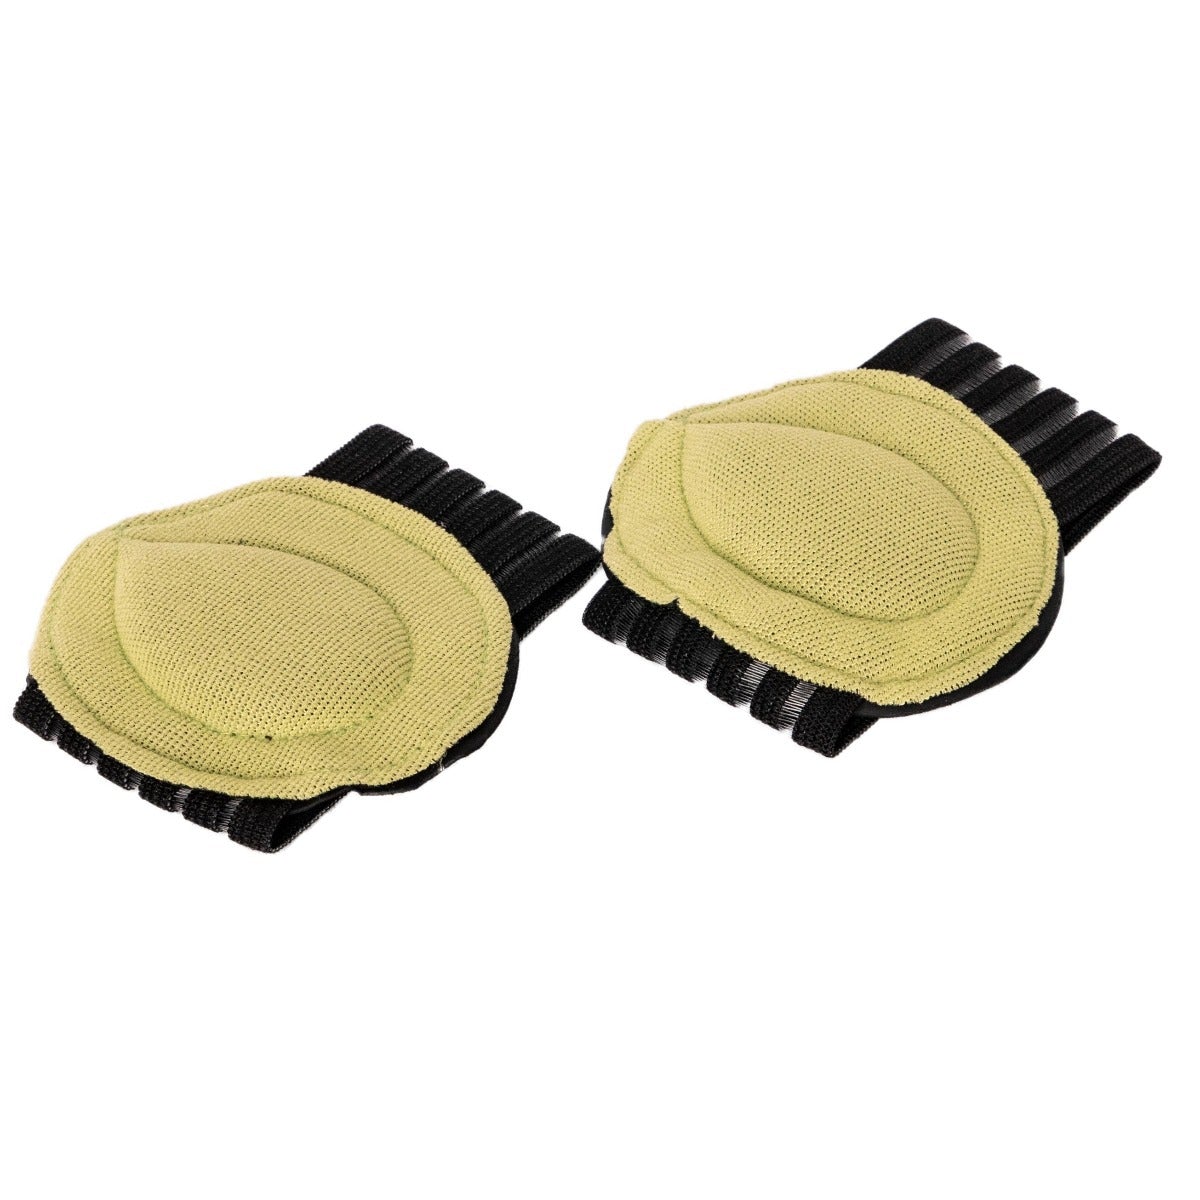 Cushioned Orthotic Arch Support Pads - Mounteen. Worldwide shipping available.